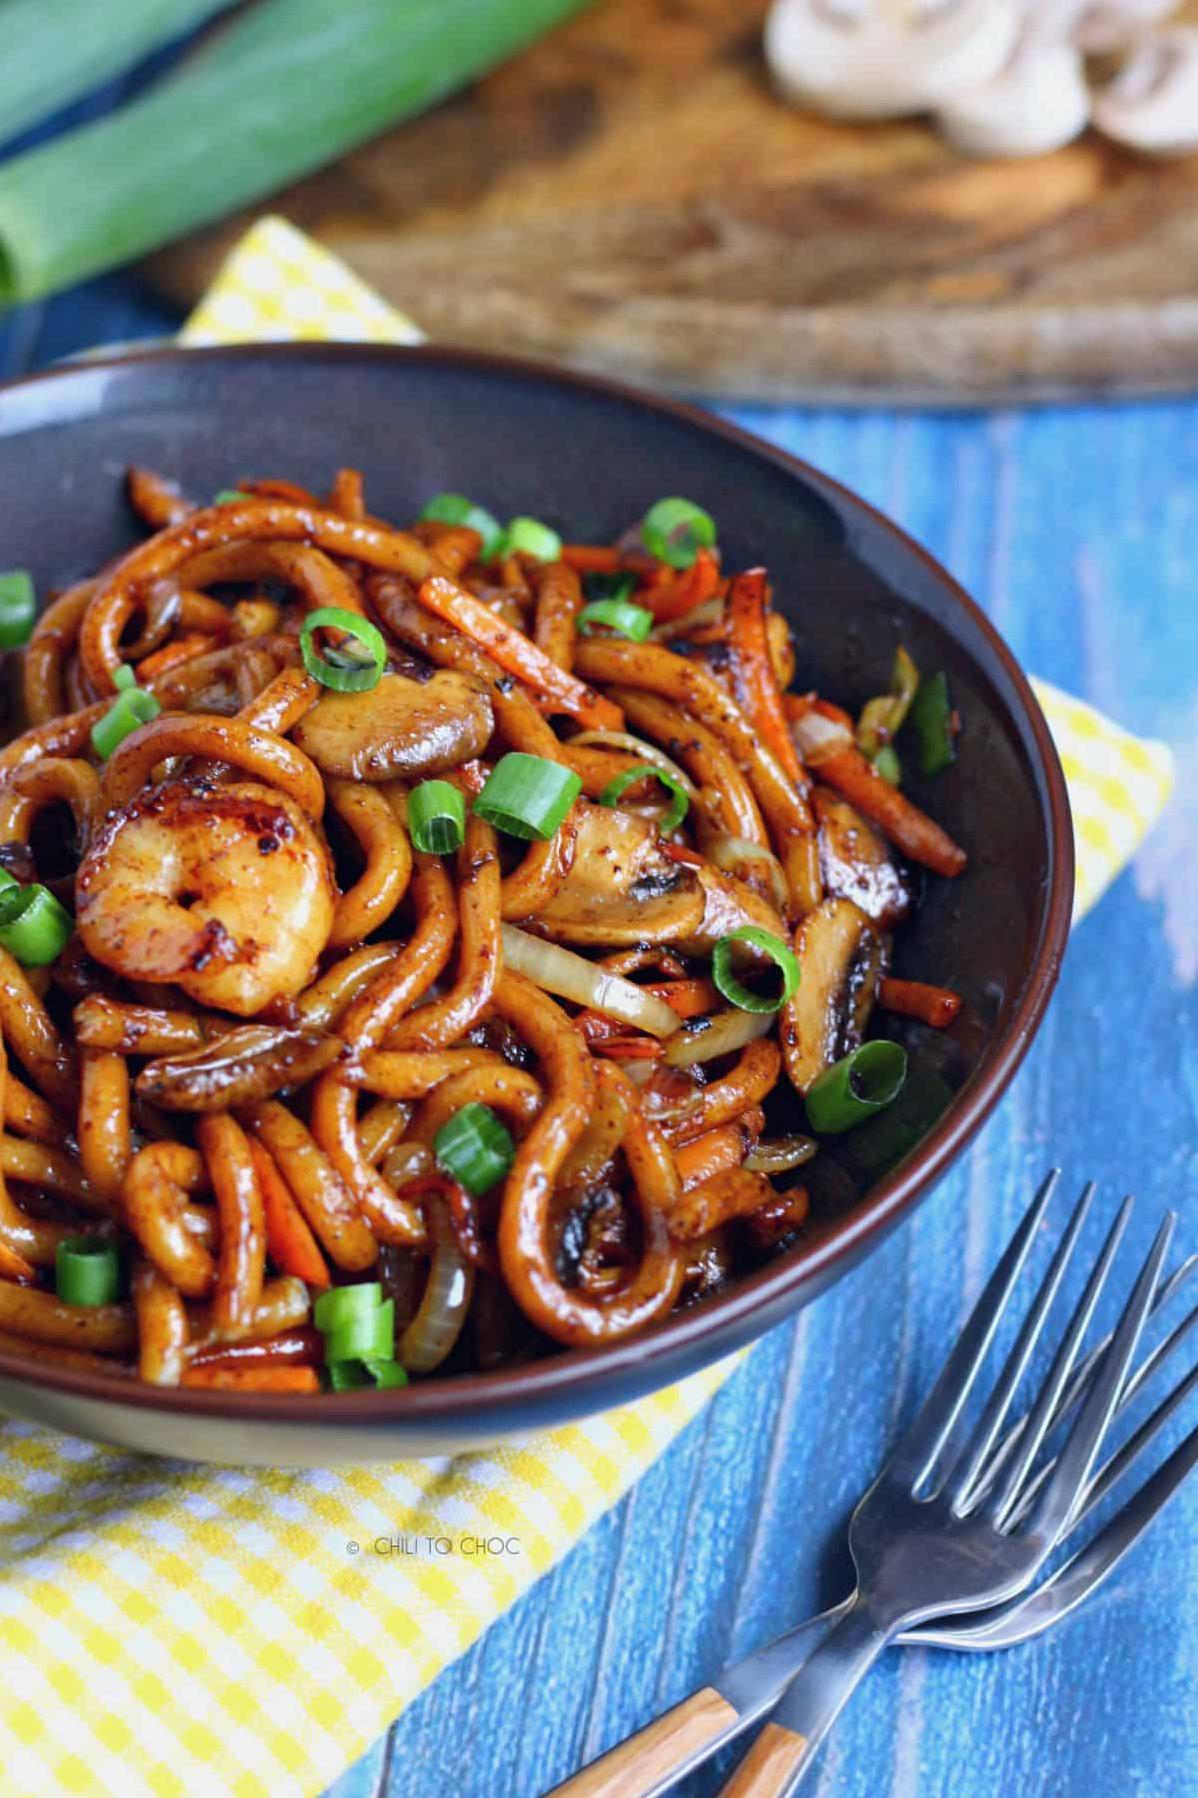 Delicious Japanese pan noodles with sauteed shrimp recipe